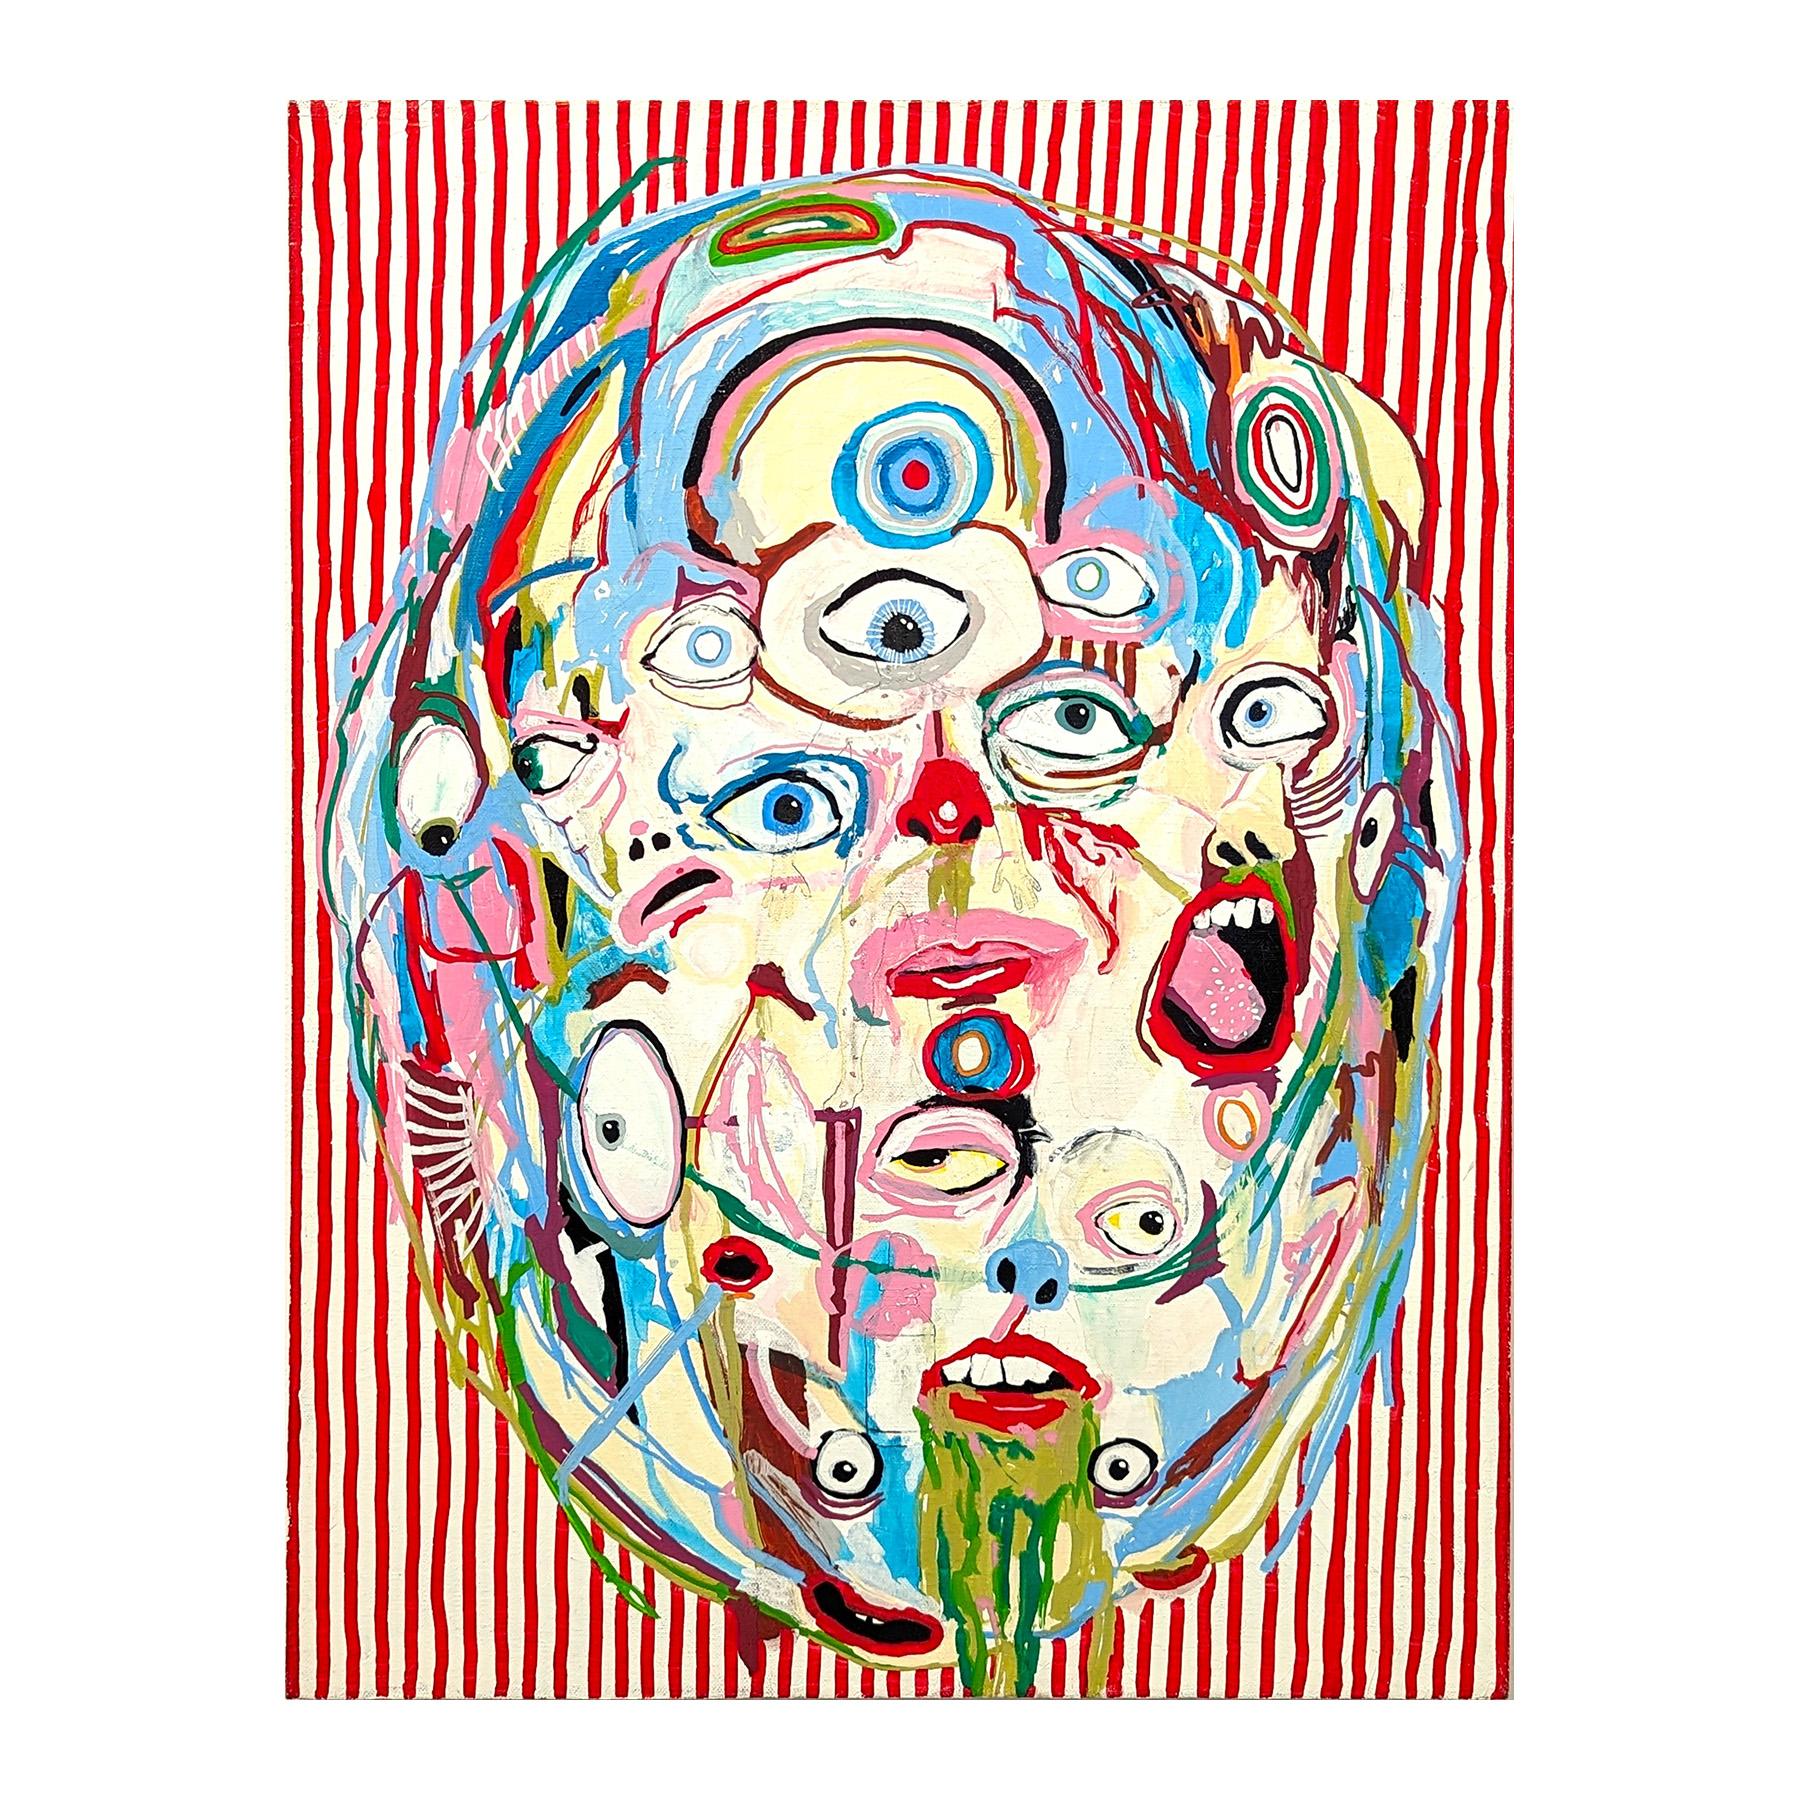 Colorful surrealist painting by Memphis-based contemporary artist Alex Paulus. The work features a central, homunculus-like creature with many eyes and mouths set against a red and white striped background. Currently unframed, but options are